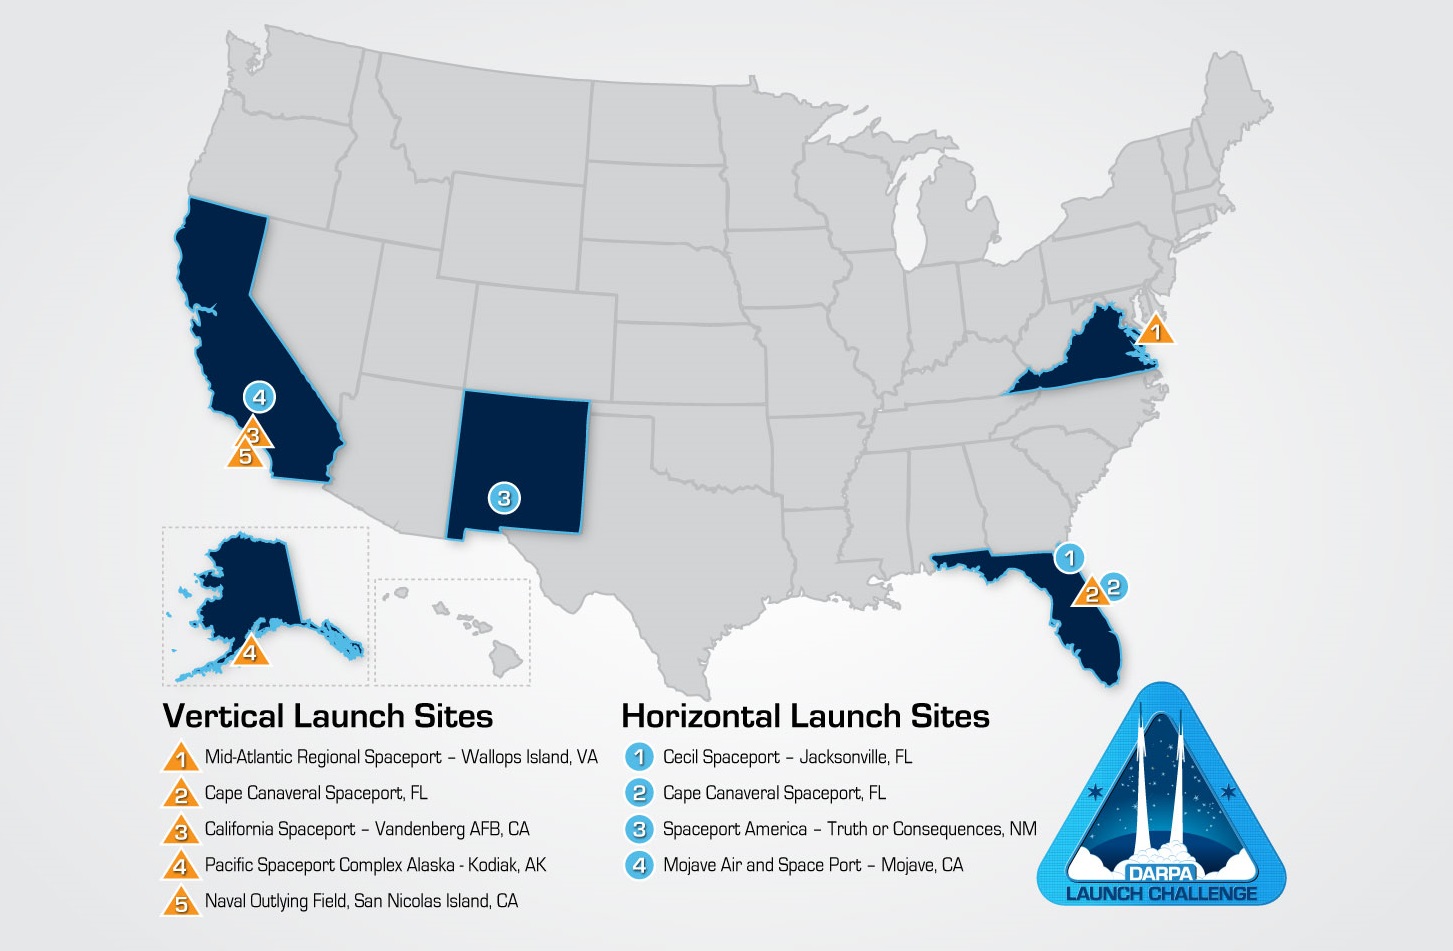 Map of the US showing launch locations for the challenge.